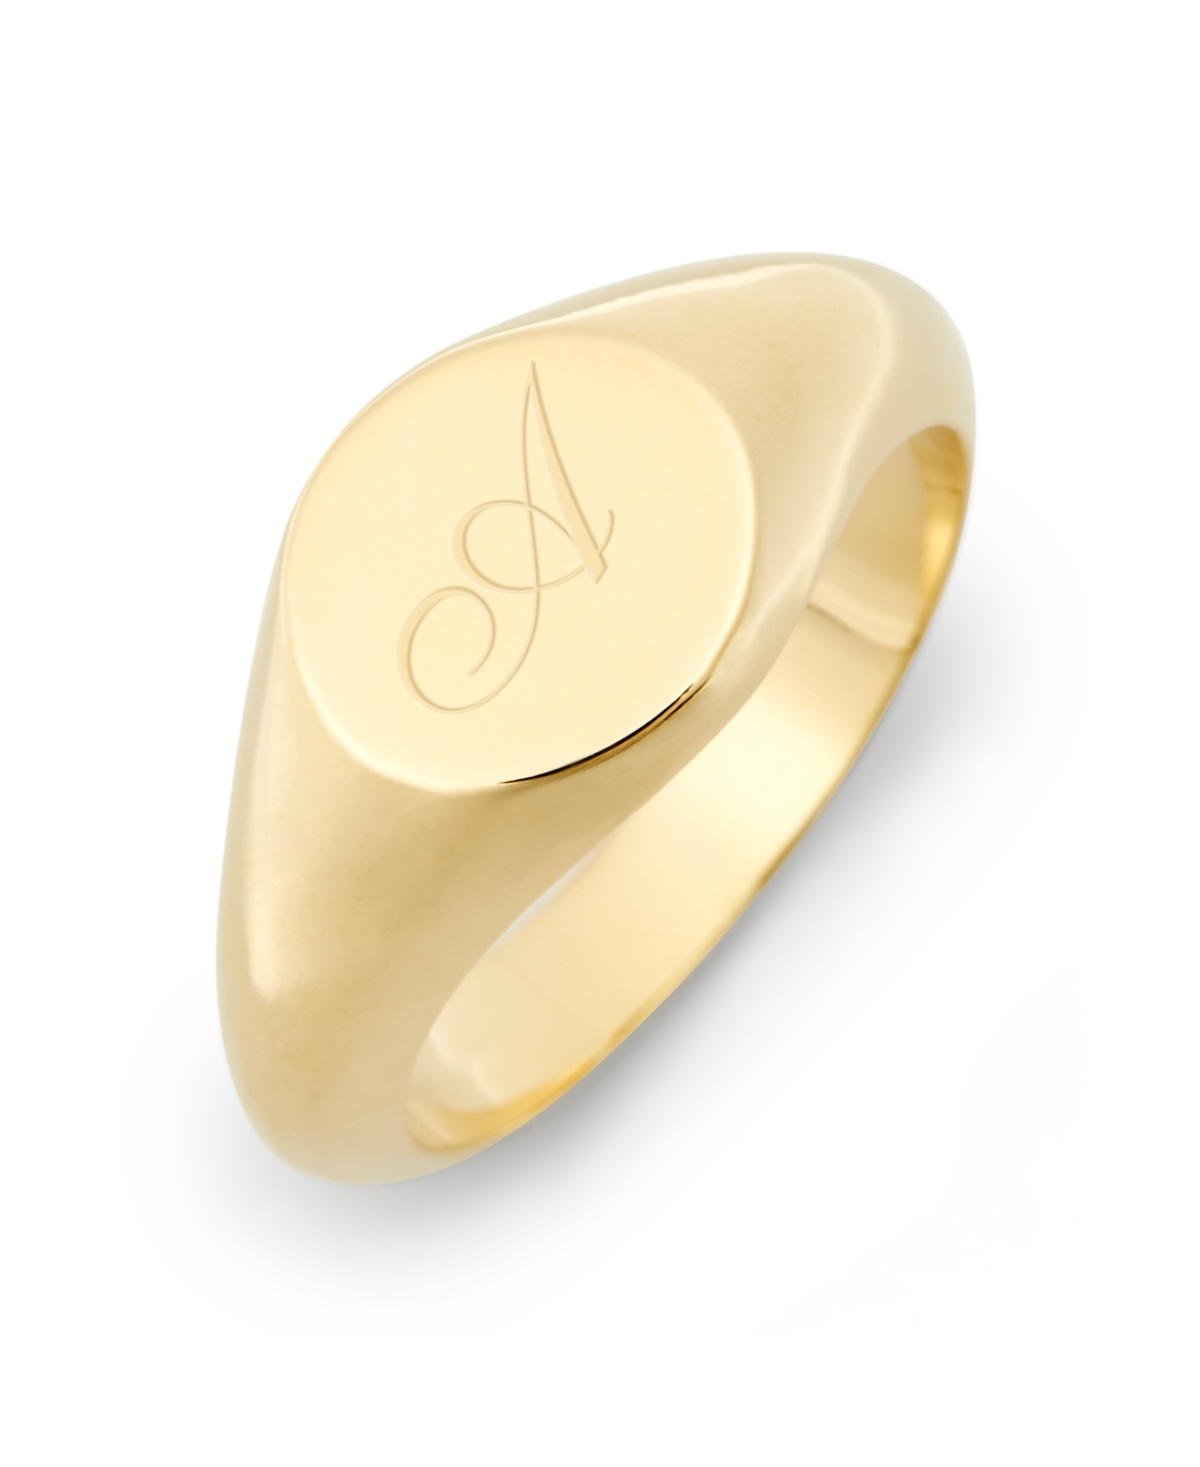 Claire Petite Initial Signet Gold-Plated Ring - Gold - S